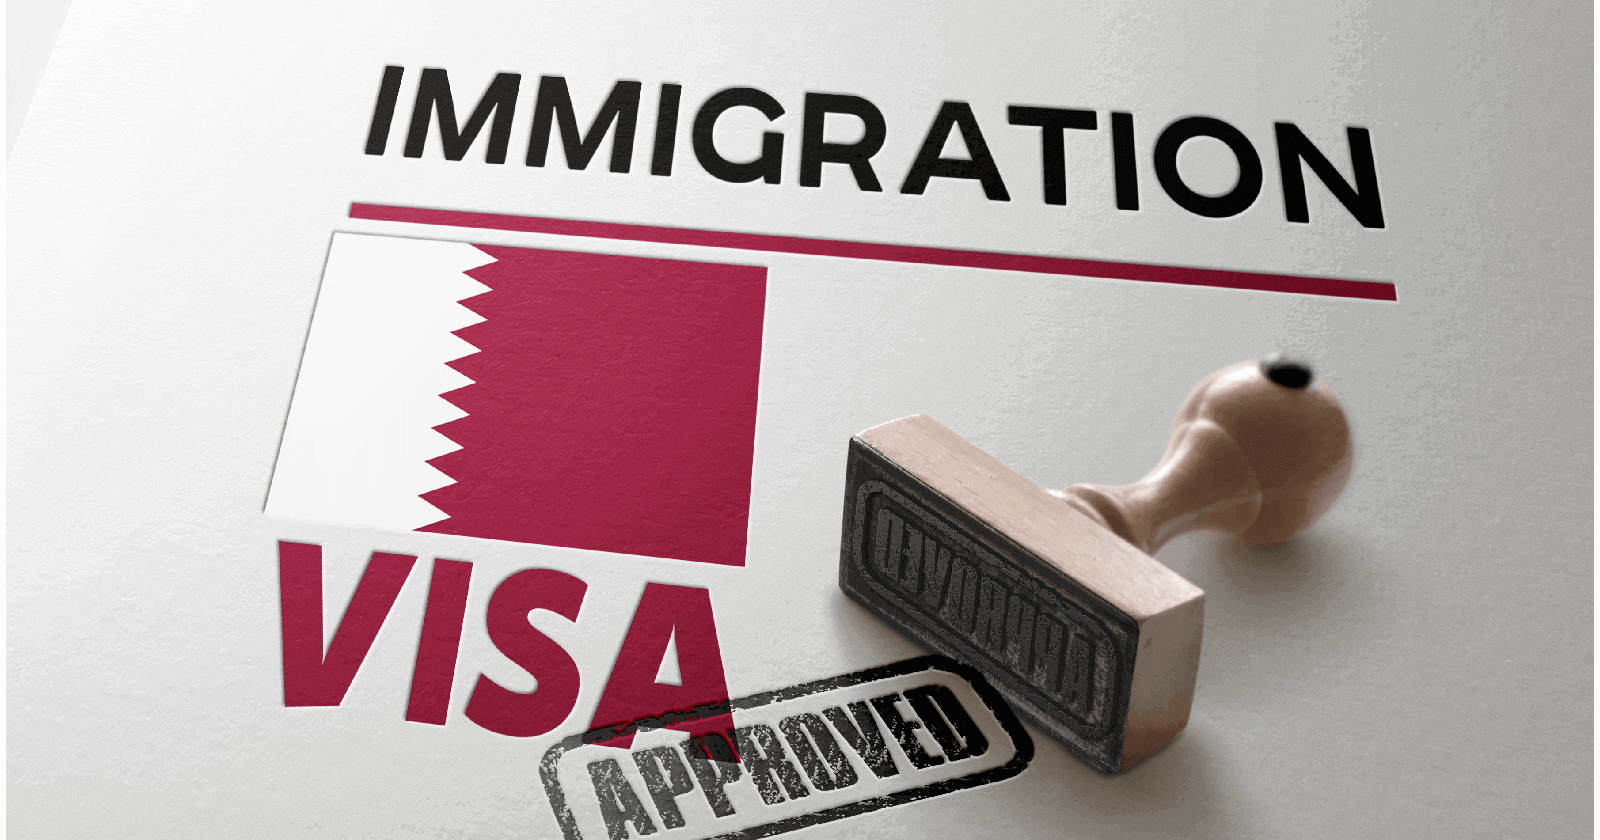 Qatar Visa for Indians - Visa Types, Fees, and How to Apply